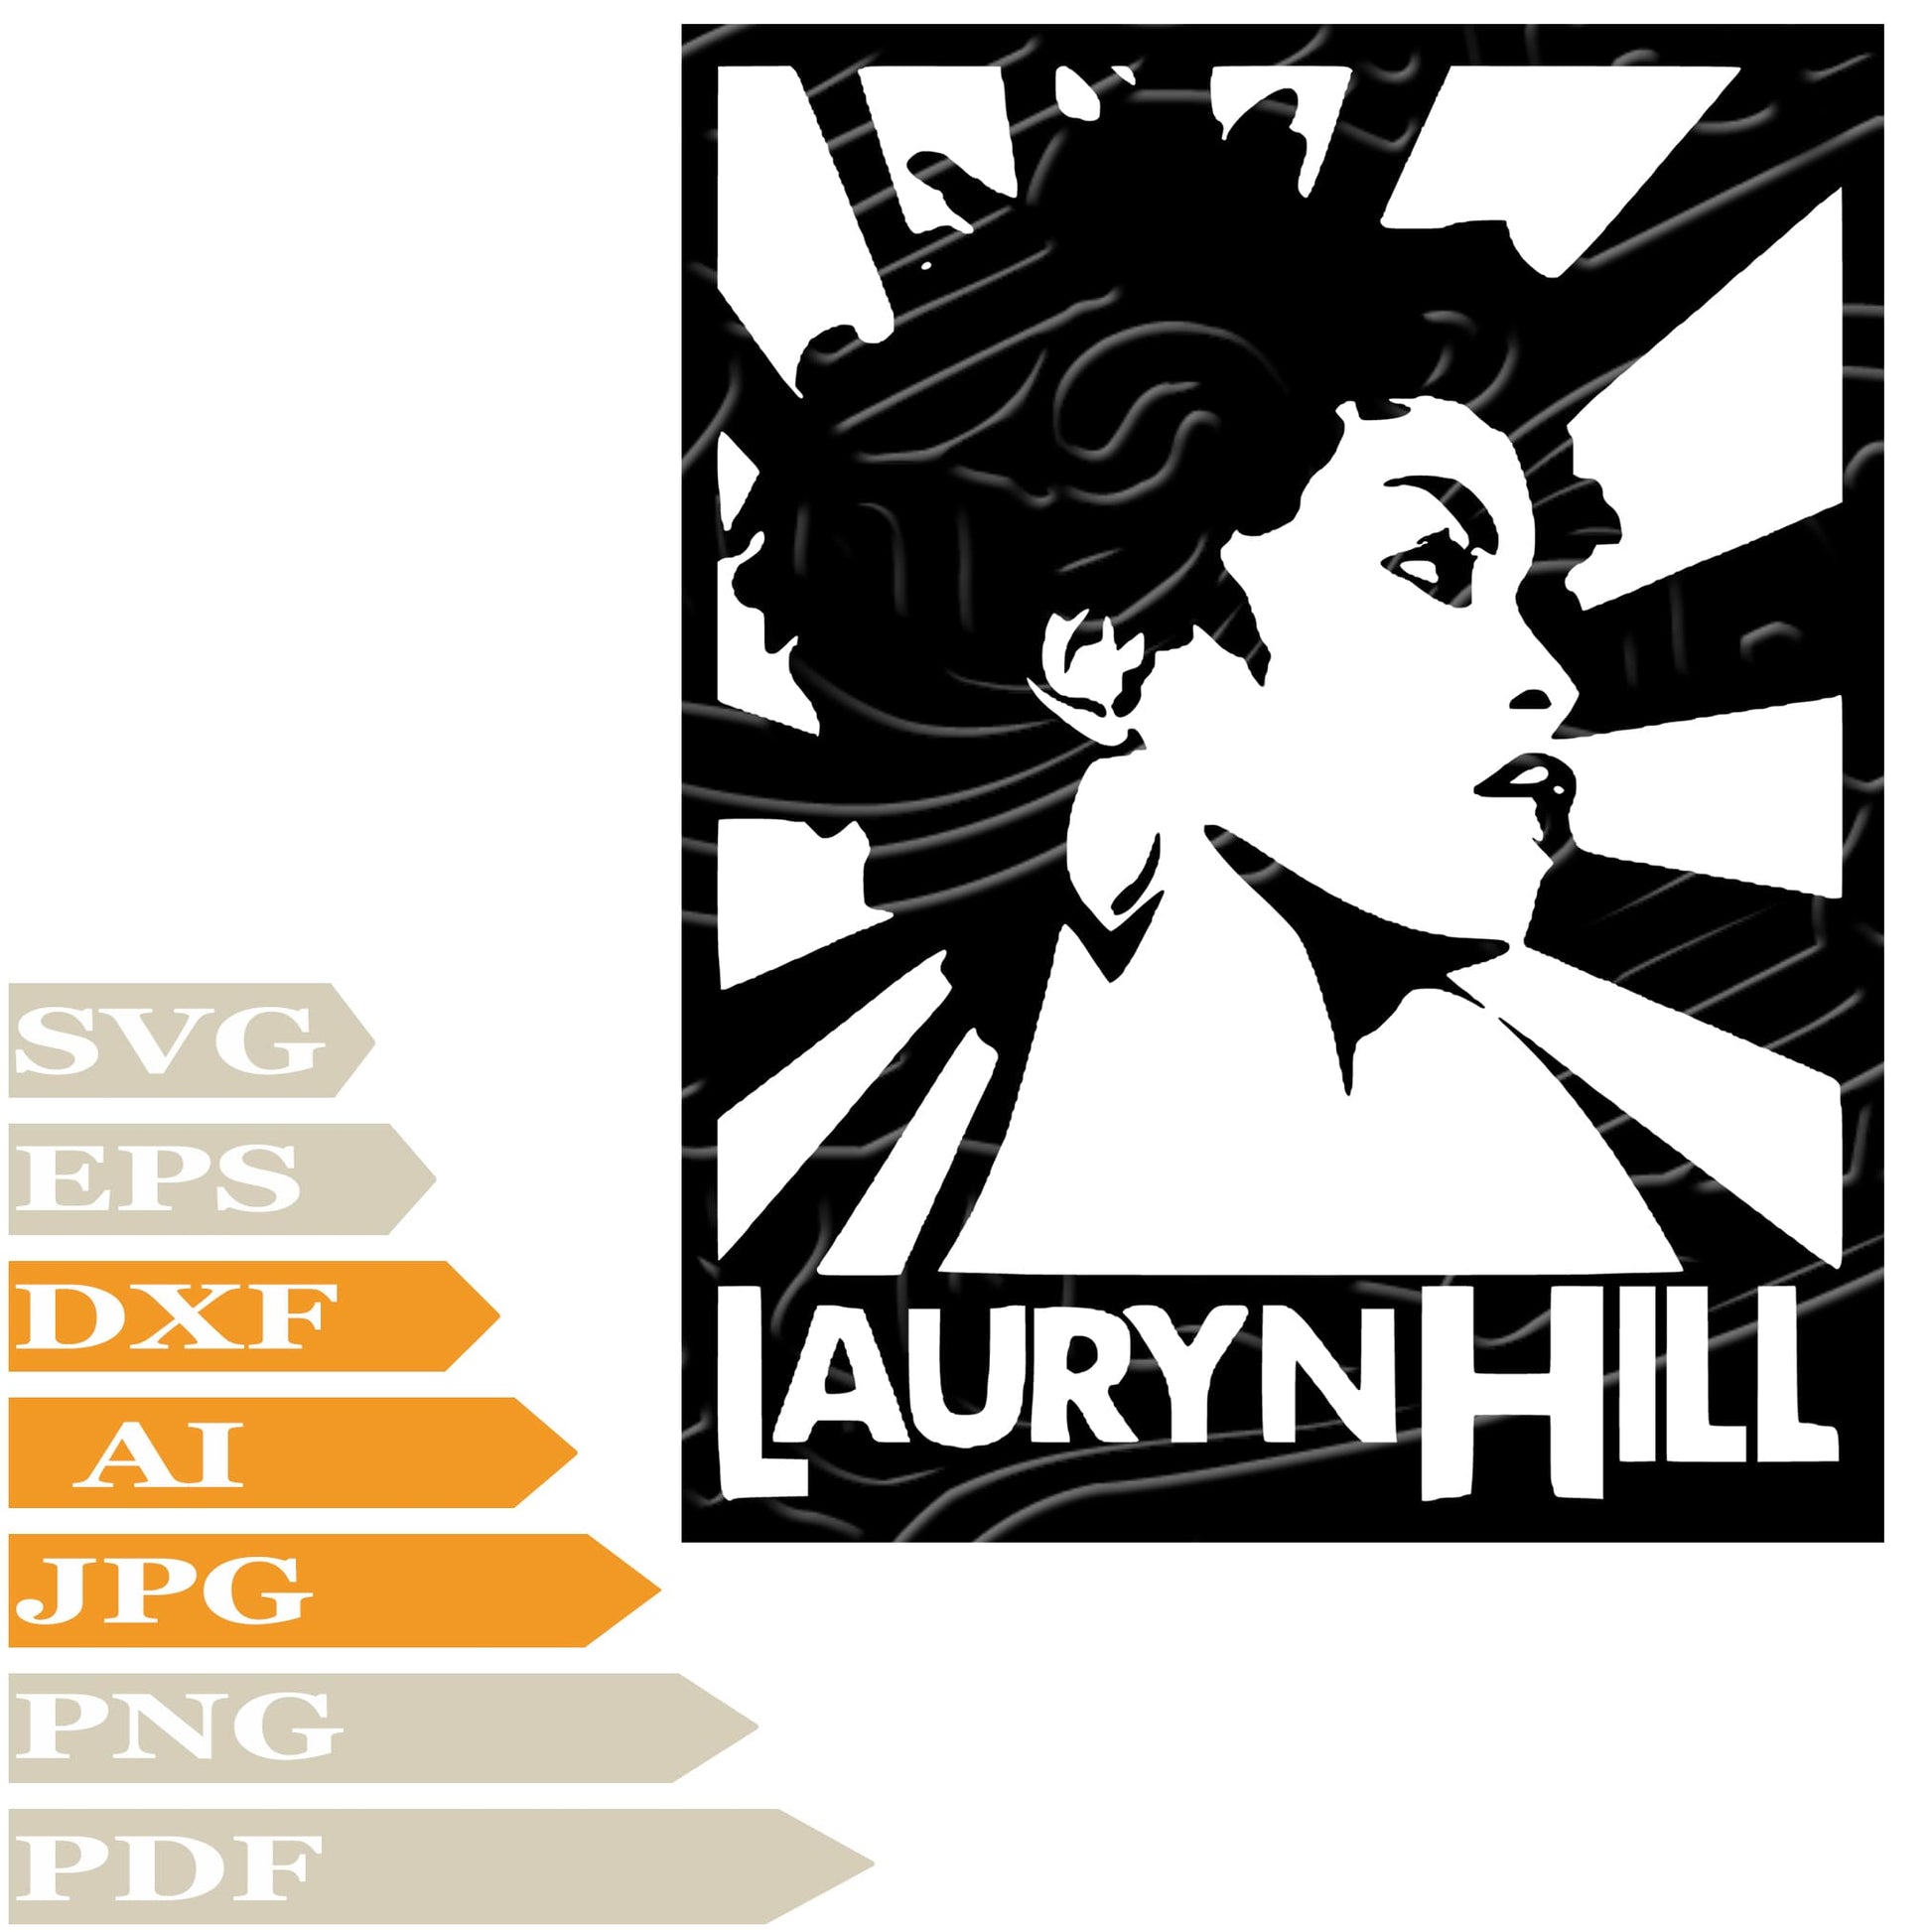 Lauryn Hill SVG-Lauryn Hill Face Personalized SVG-Lauryn Hill Drawing SVG-Singer Lauryn Hill Vector Illustration-PNG-Decal-Cricut-Digital Files-Clip Art-Cut File-For Shirts-Silhouette